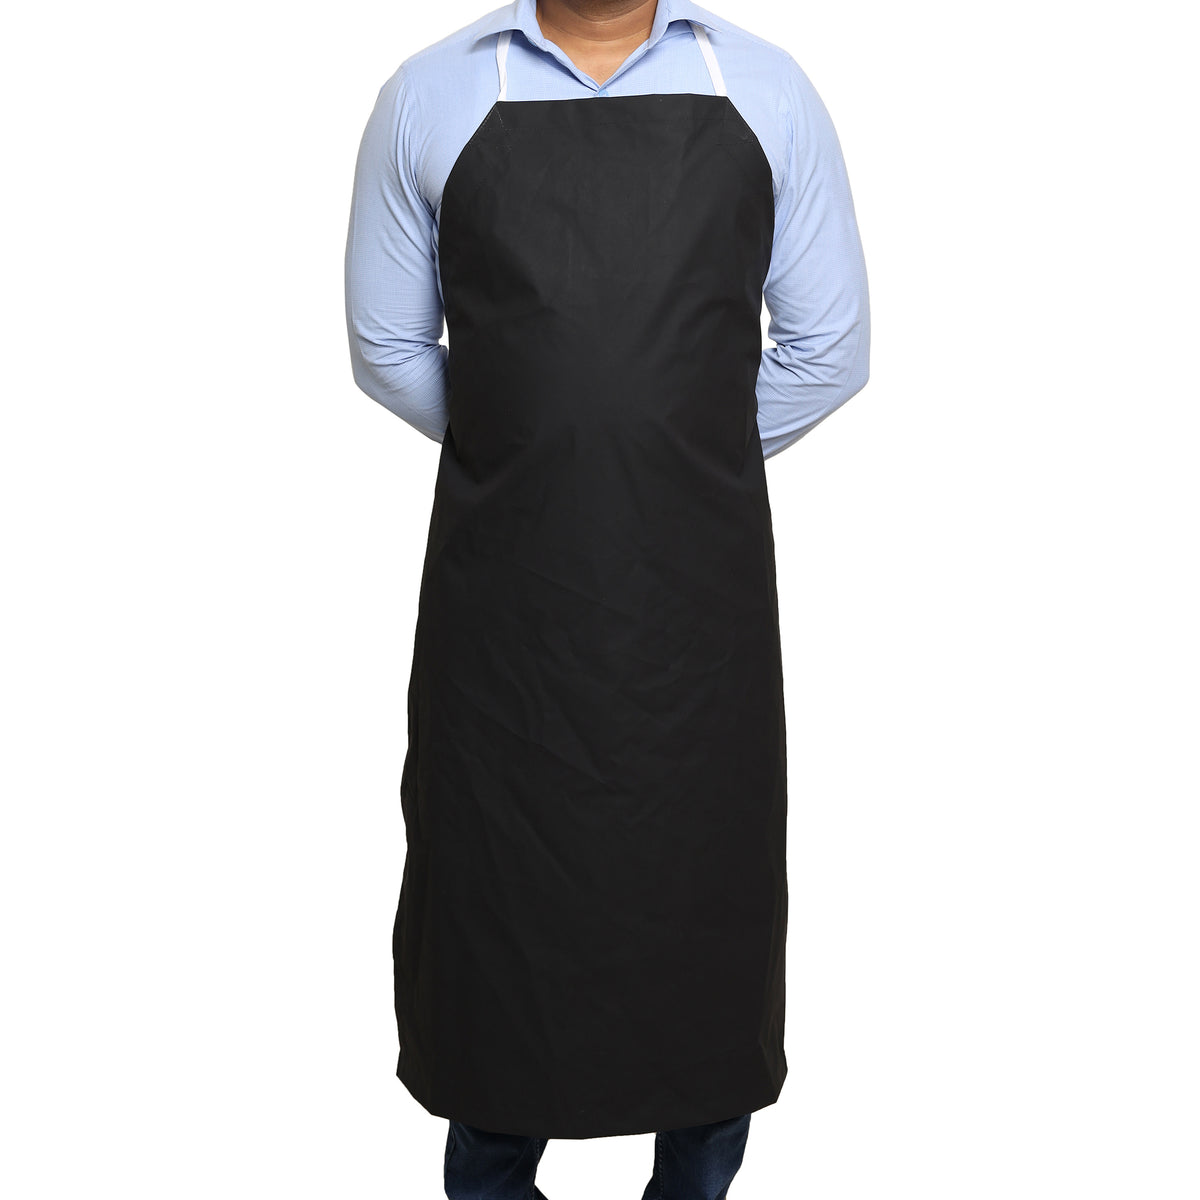 Amazon.com: GNJCV Chemical Resistant Vinyl Apron - Extra Large Blue  Waterproof PVC Aprons for Dishwasher,Dog Grooming,Fish Cleaning : Tools &  Home Improvement